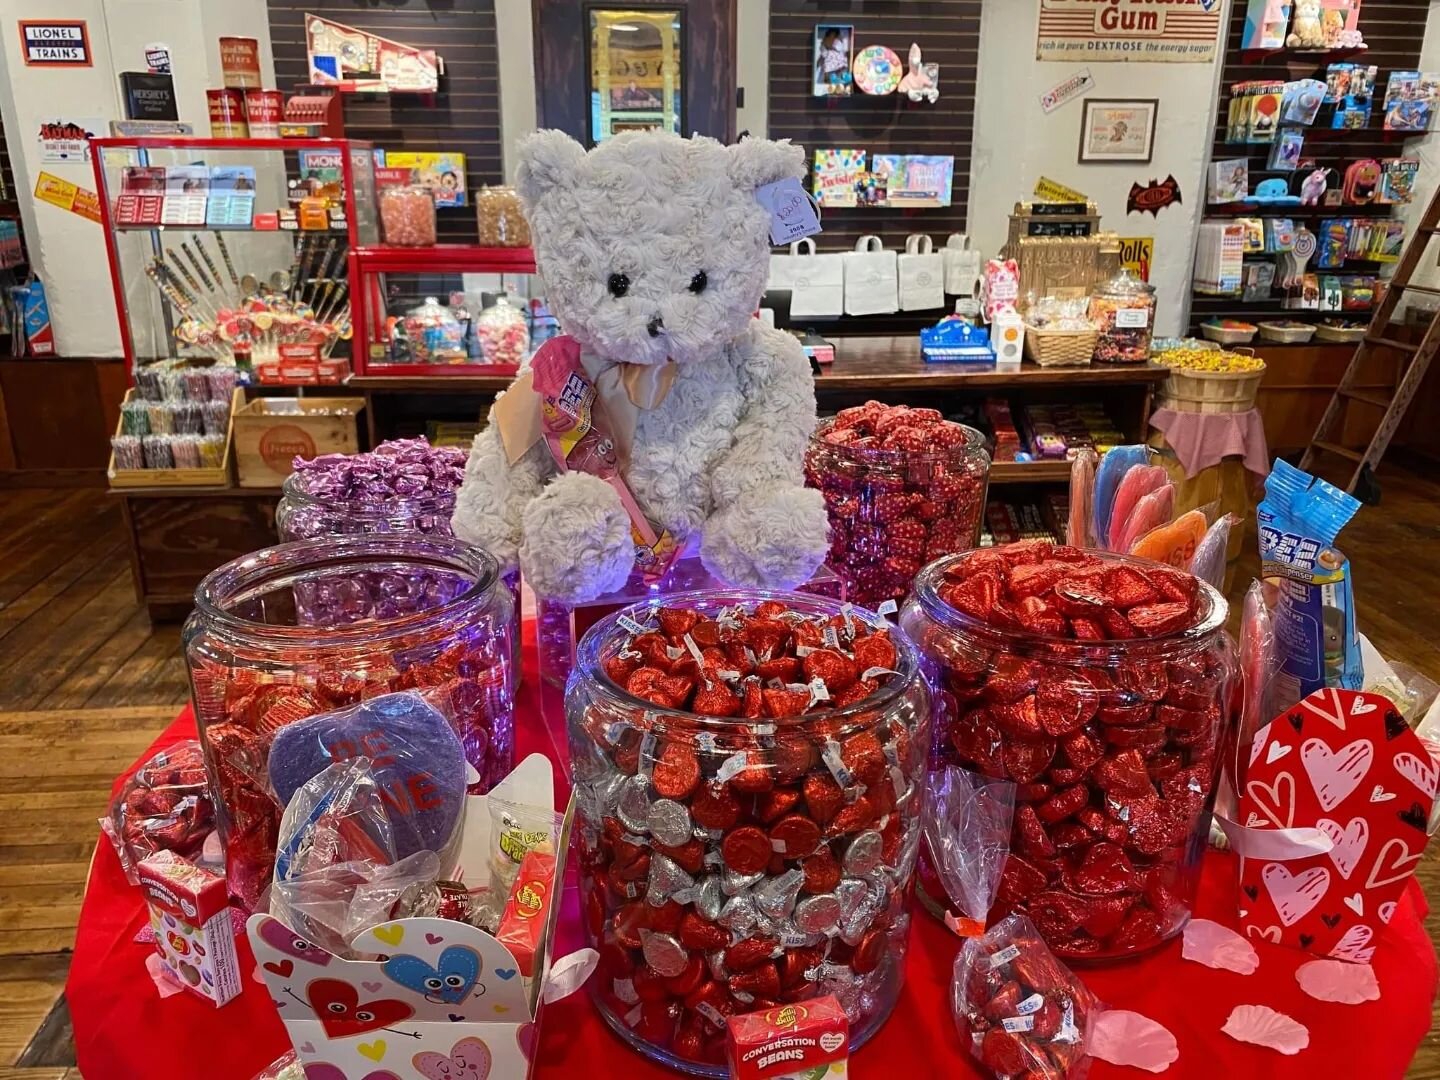 Valentine's Day is only 2 weeks away!

Stop in and get some sweet stuff!
🍭🍬